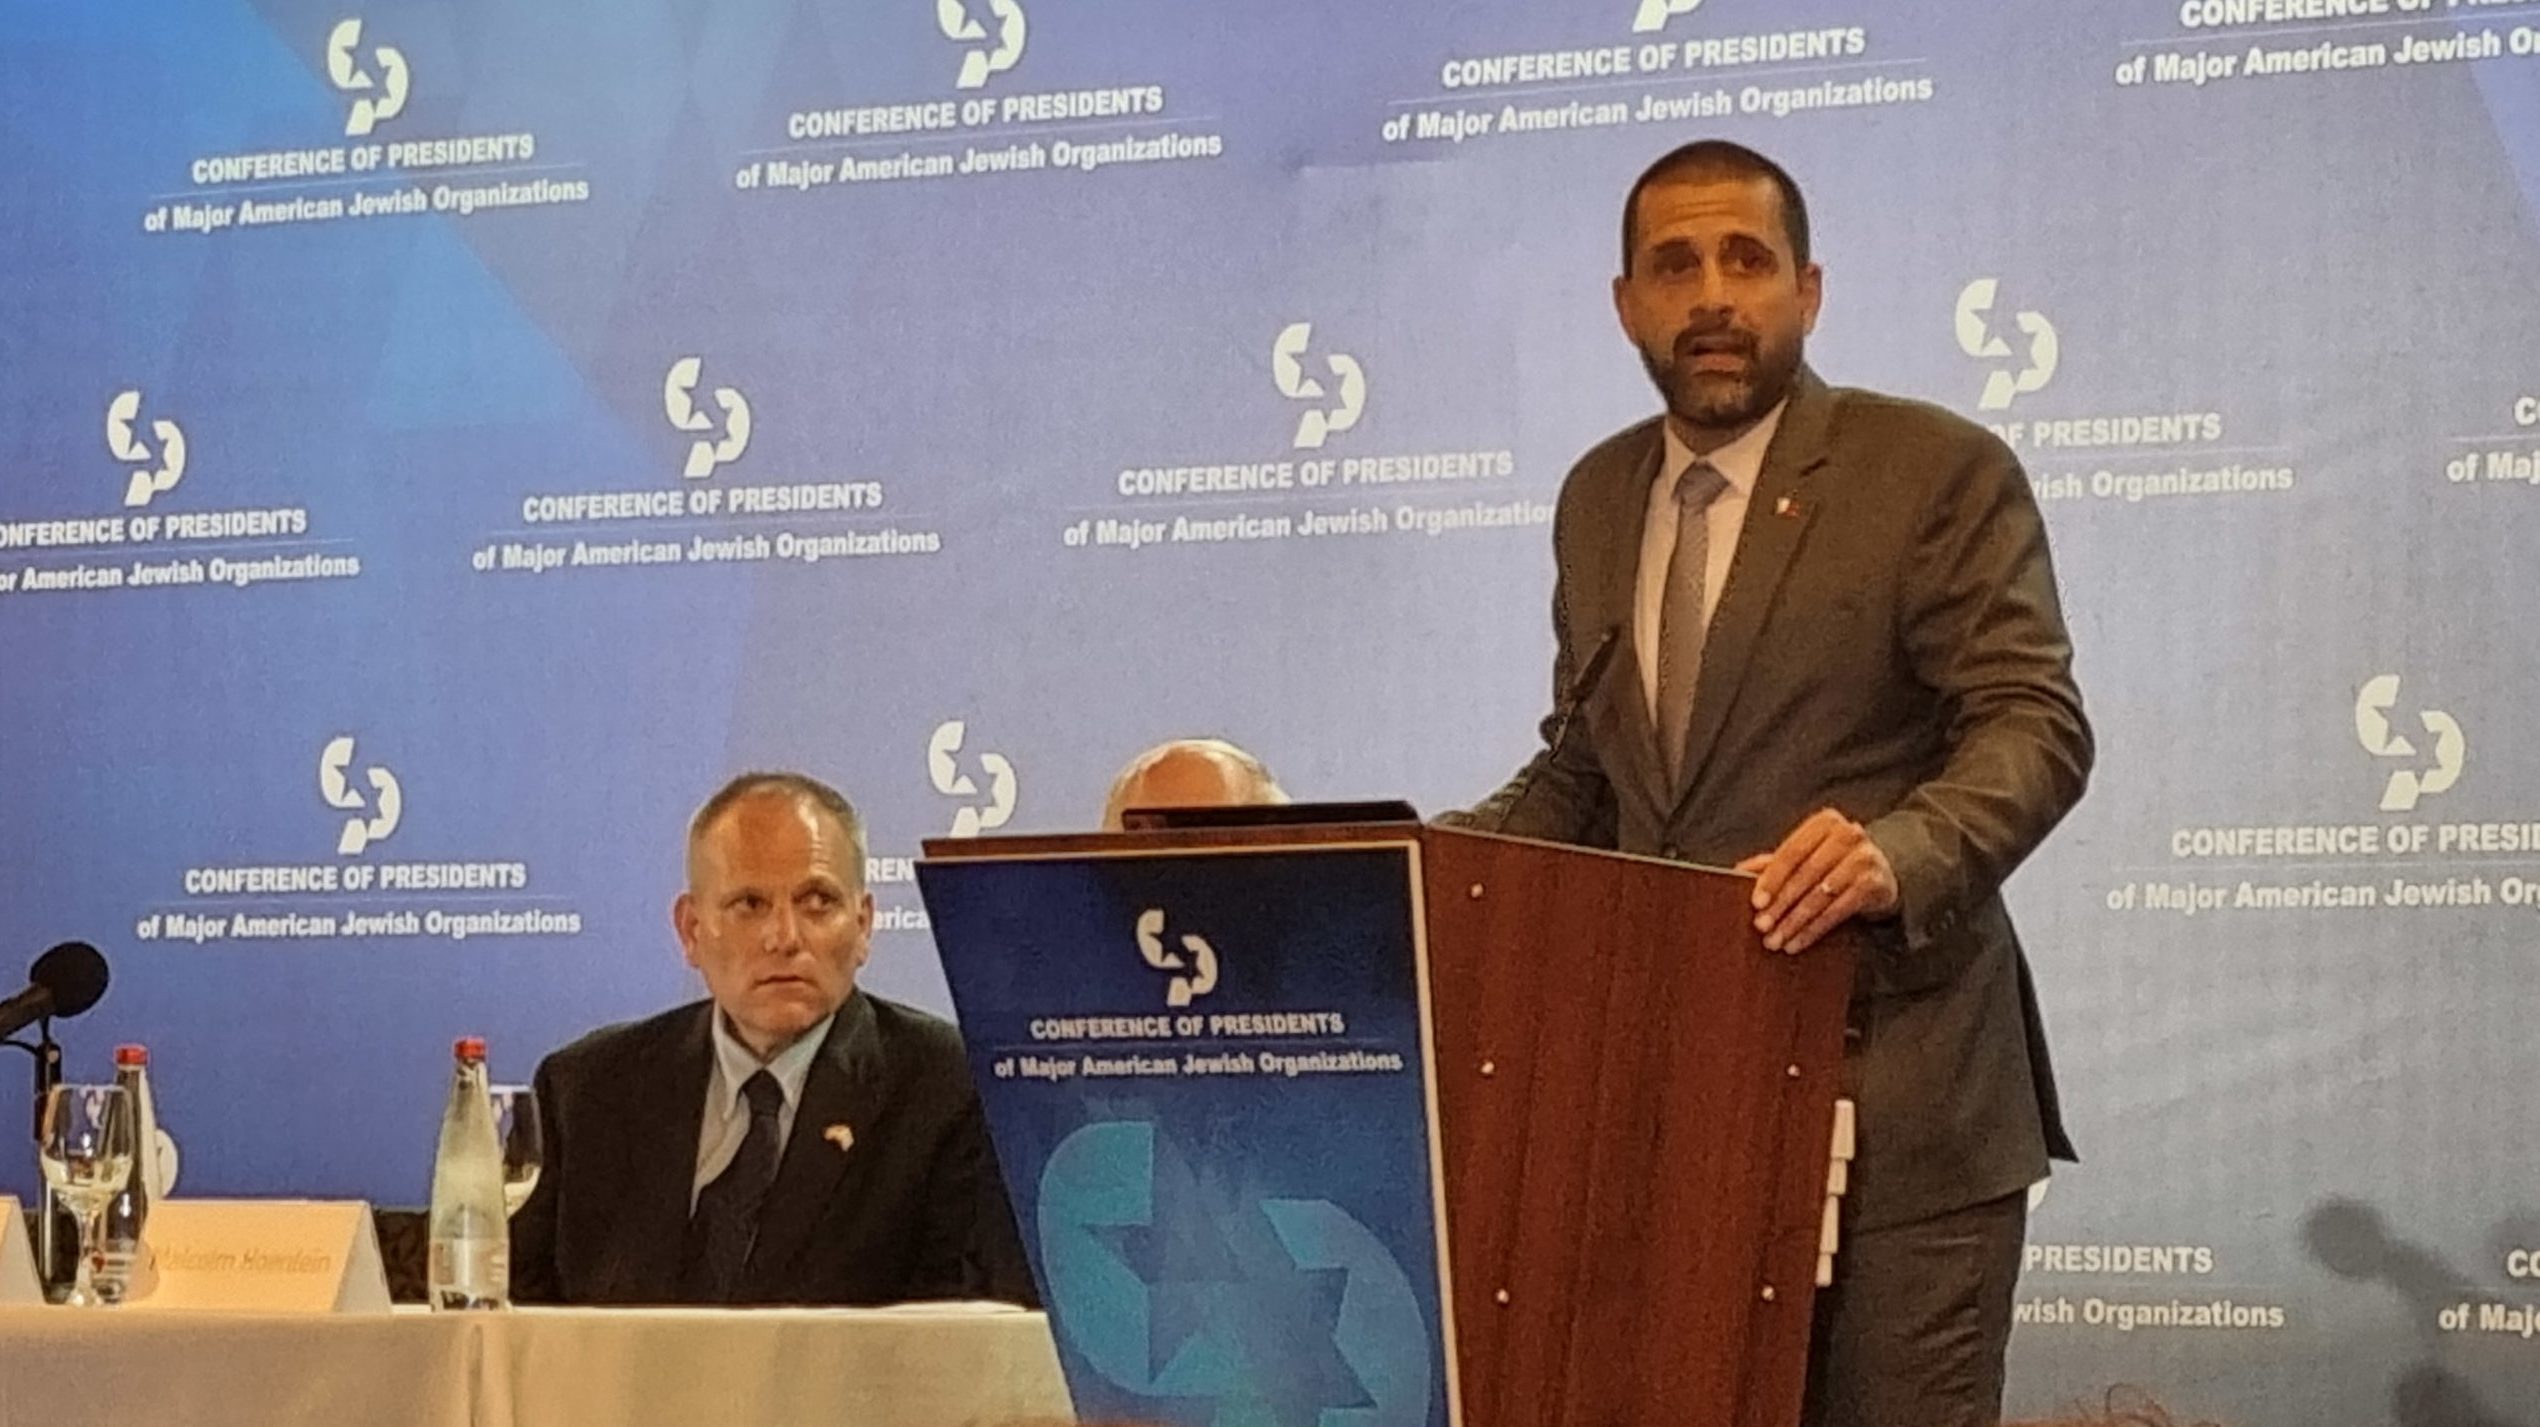 US Conference of Presidents Honors Abraham Accords